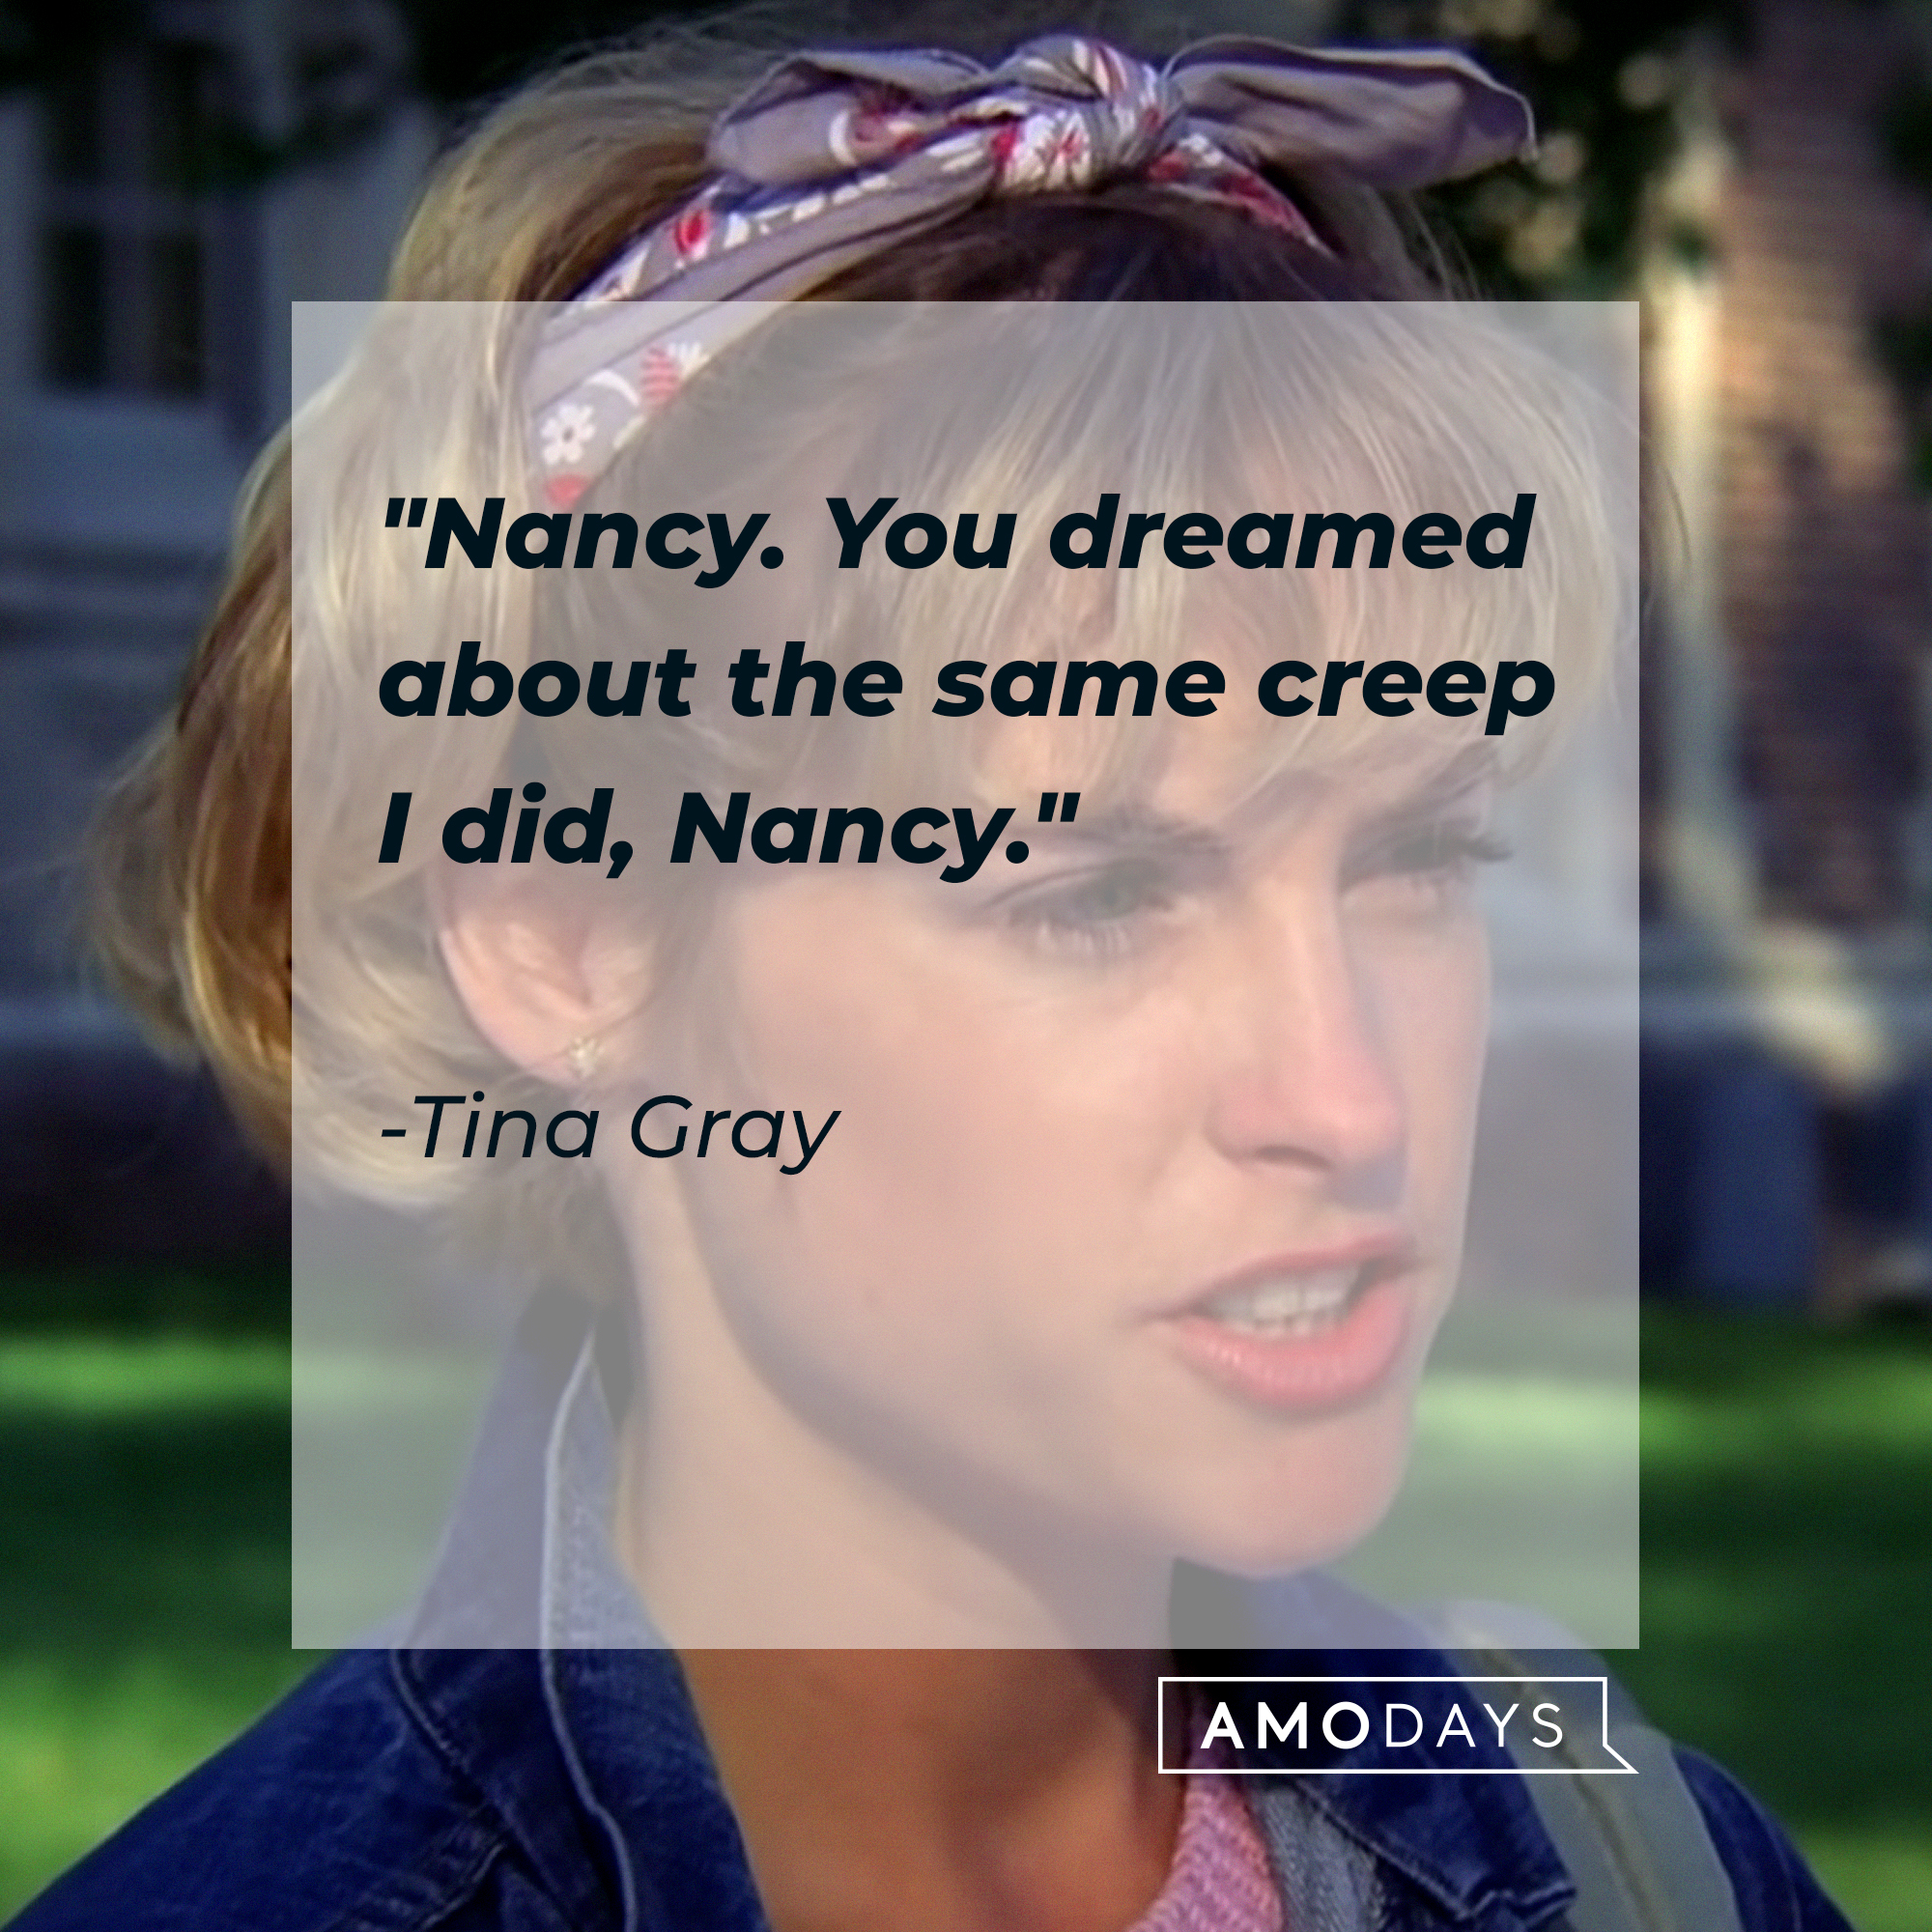 Tina Gray's quote: "Nancy. You dreamed about the same creep I did, Nancy." | Source: Facebook/ANightmareonElmStreet